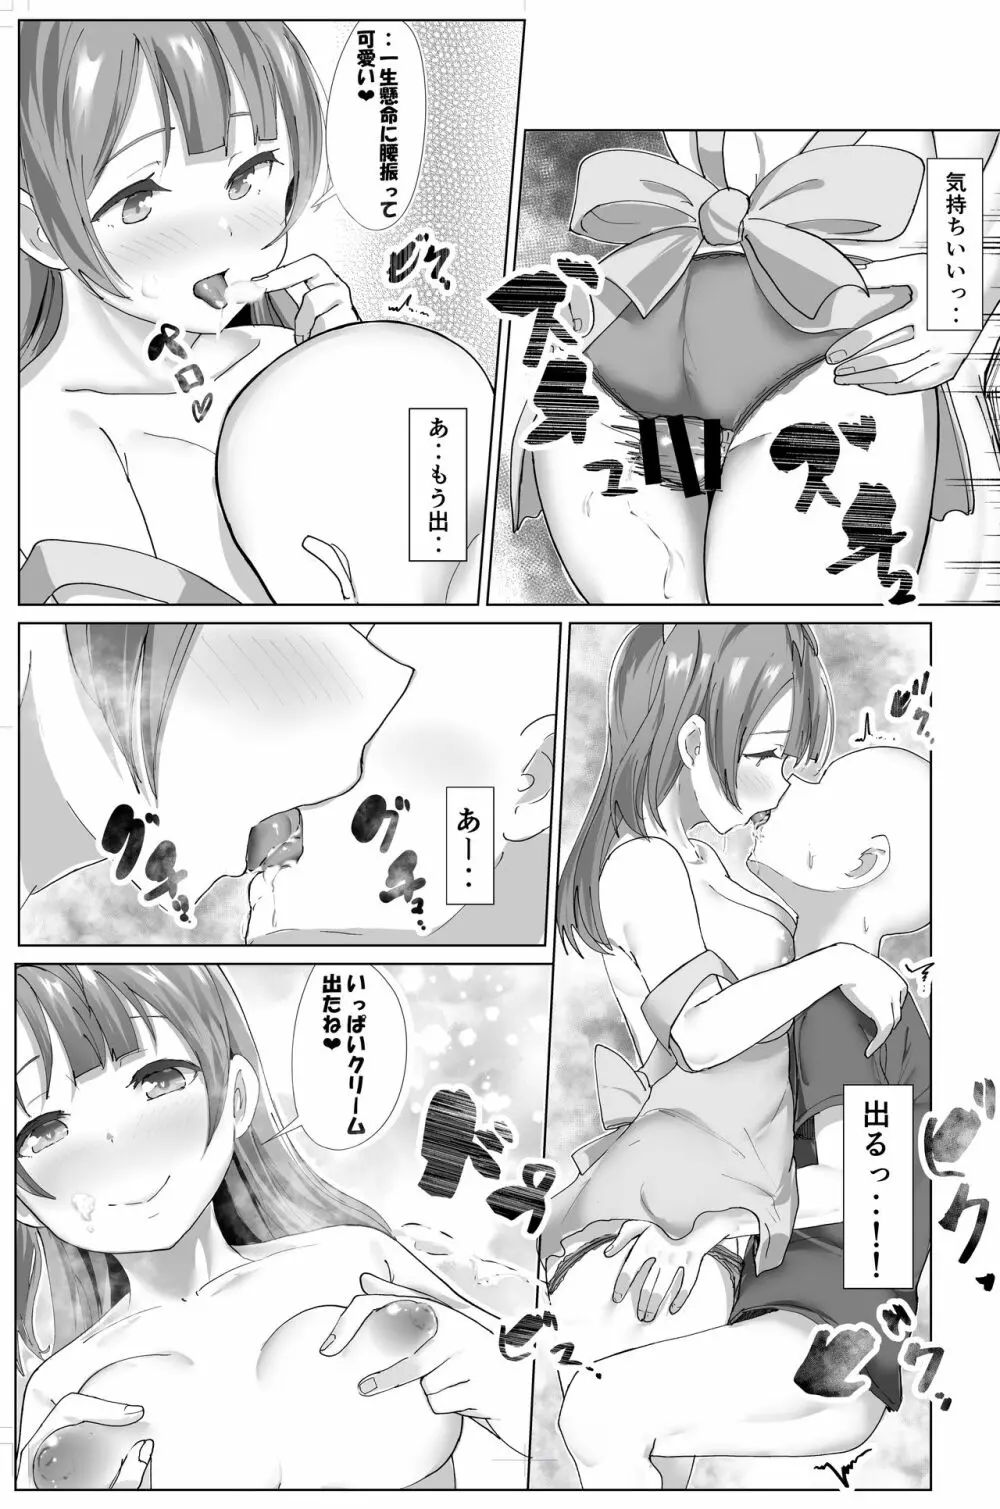 e-rn fanbox short love live doujinshi collection - page100